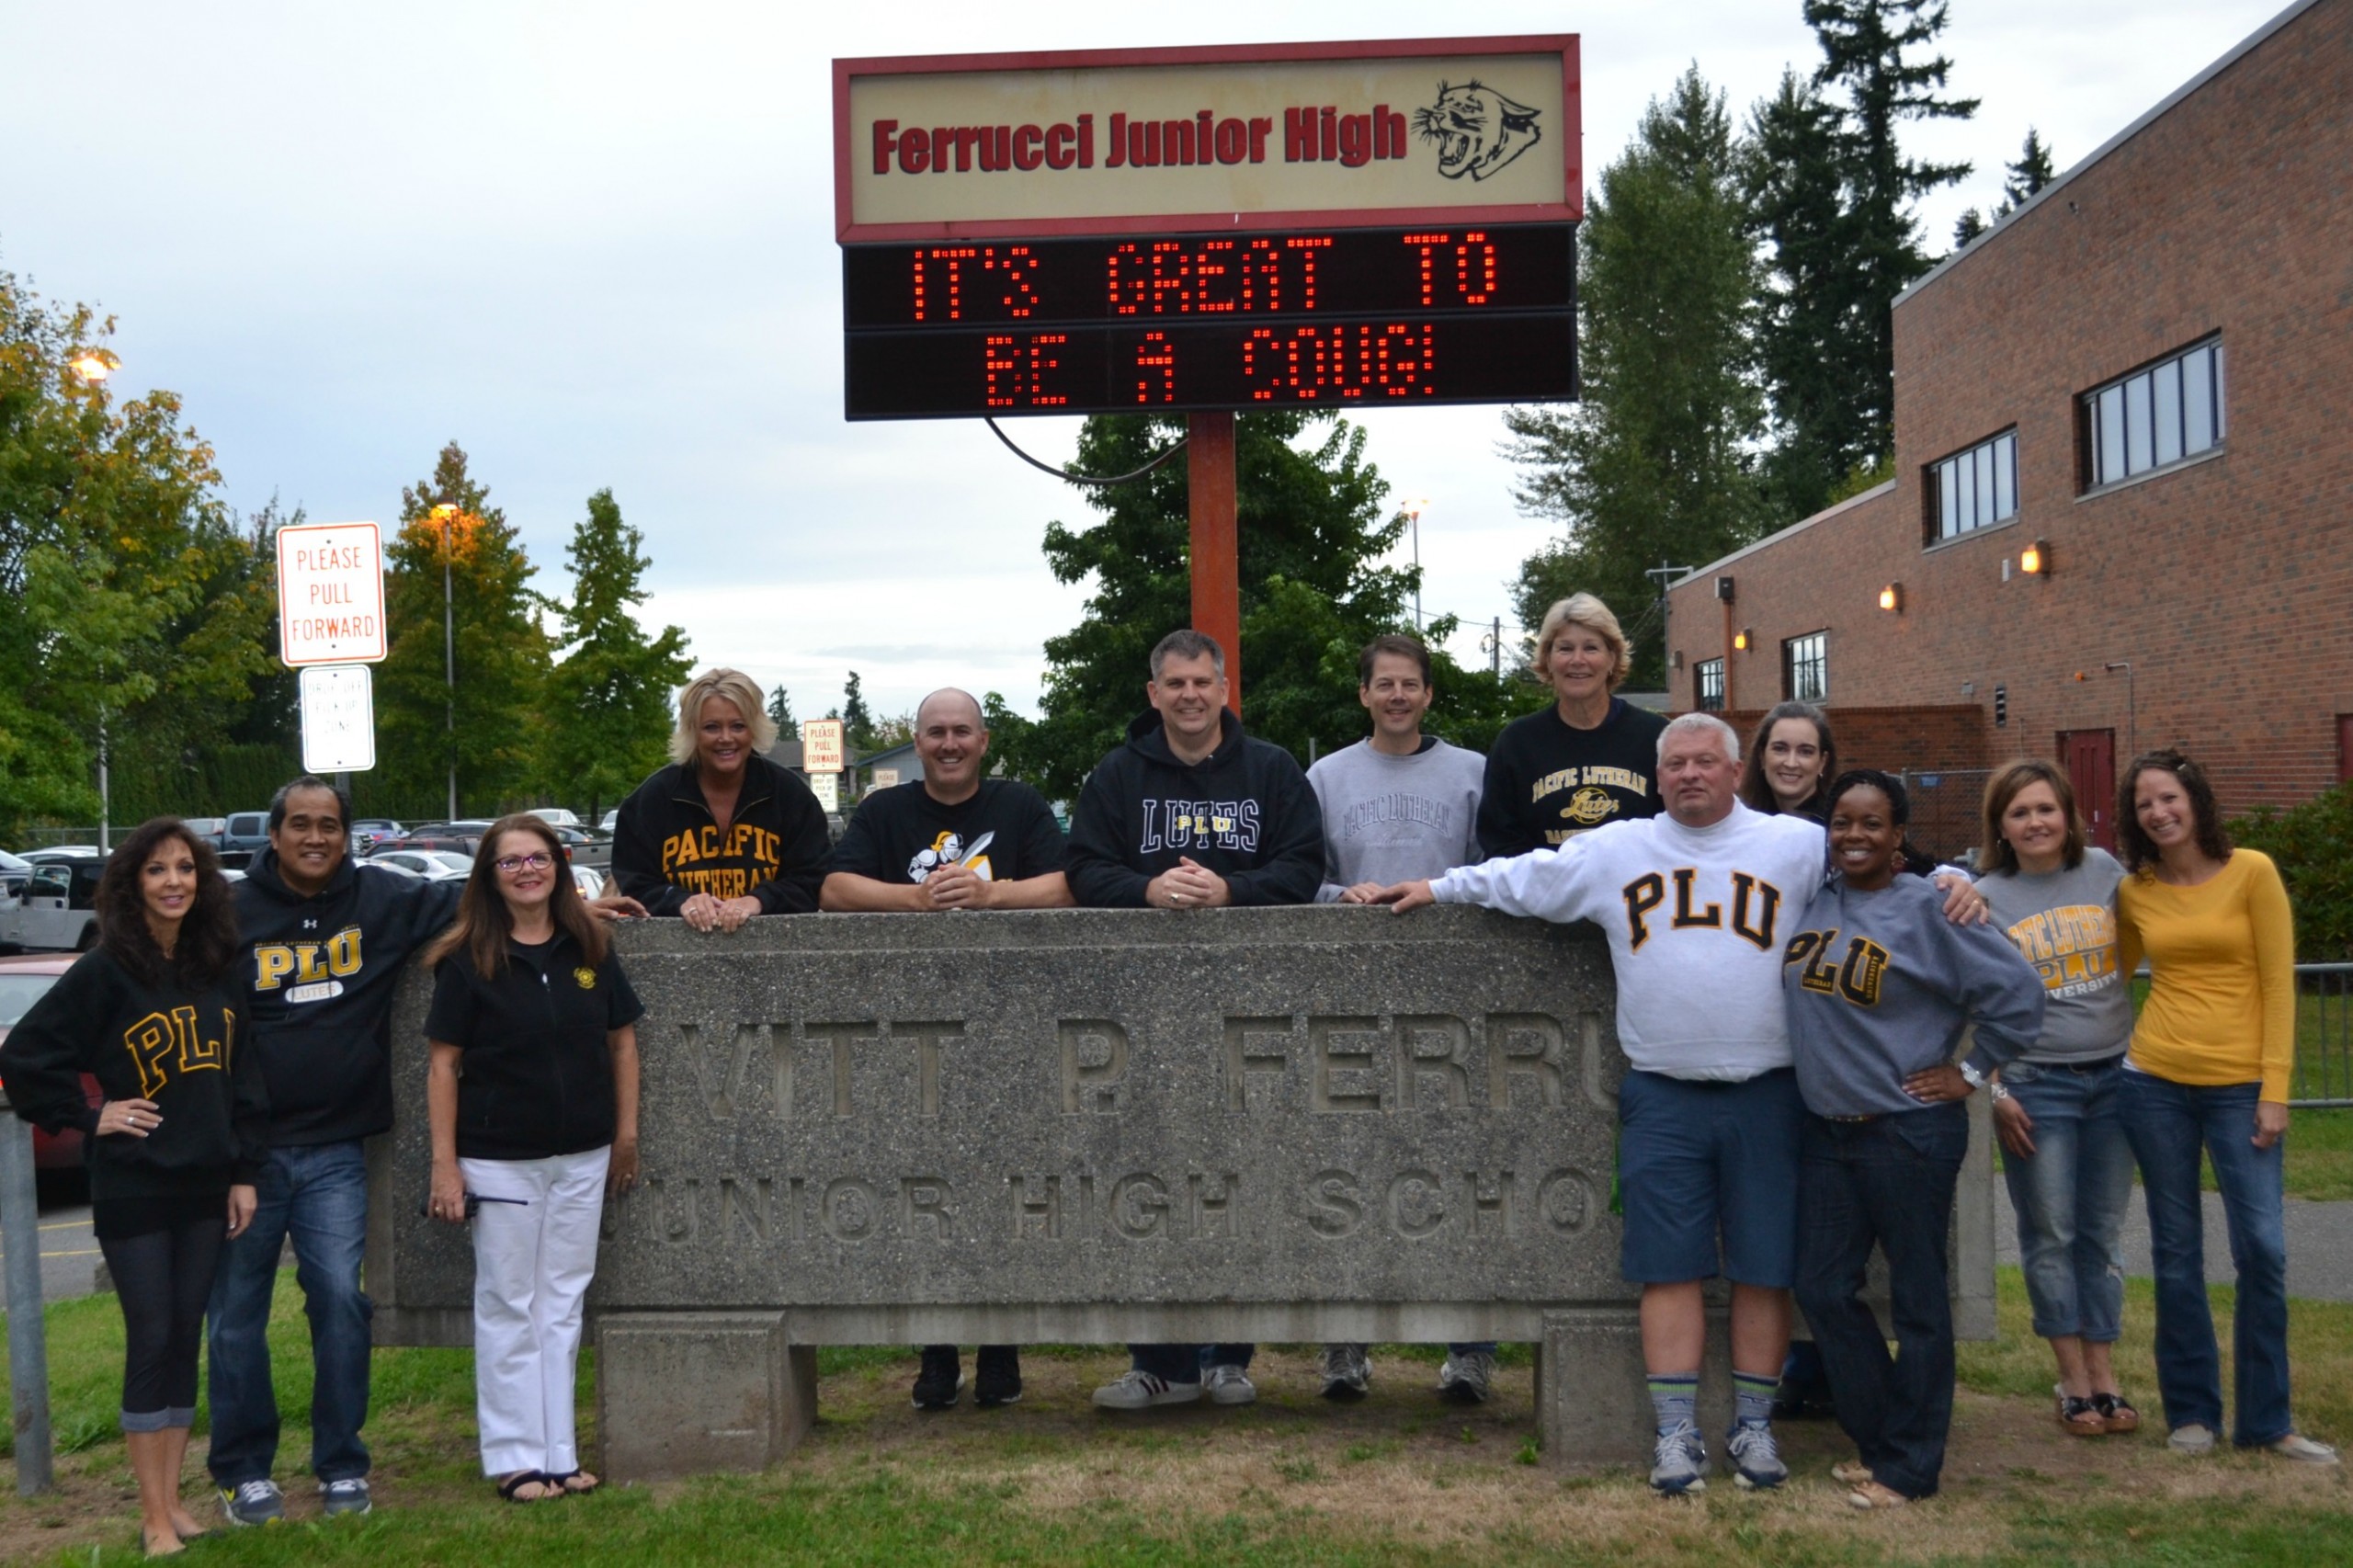 A quorum of the 15 Lutes on staff at Ferrucci Junior High pose for a group photo outside the Puyallup school. From left: Jeanine Wernofsky ’82, Ron Baltazar ’00, Joan Forseth ’91, Kim Lawson ’82, Brent Anderson ’97, Steve Leifsen ’96, Bob Rink ’92, Cindy VanHulle ’76, Baron Coleman ’02, Erica Lightbody ’95, Tawana Bens ’05, Krista McBride ’90 and Deirdre Davis ’05. Two more Lutes are not pictured: Dan Floyd ’92 and Brooke Gustafson ’05. (Photo courtesy of Ferrucci Junior High)